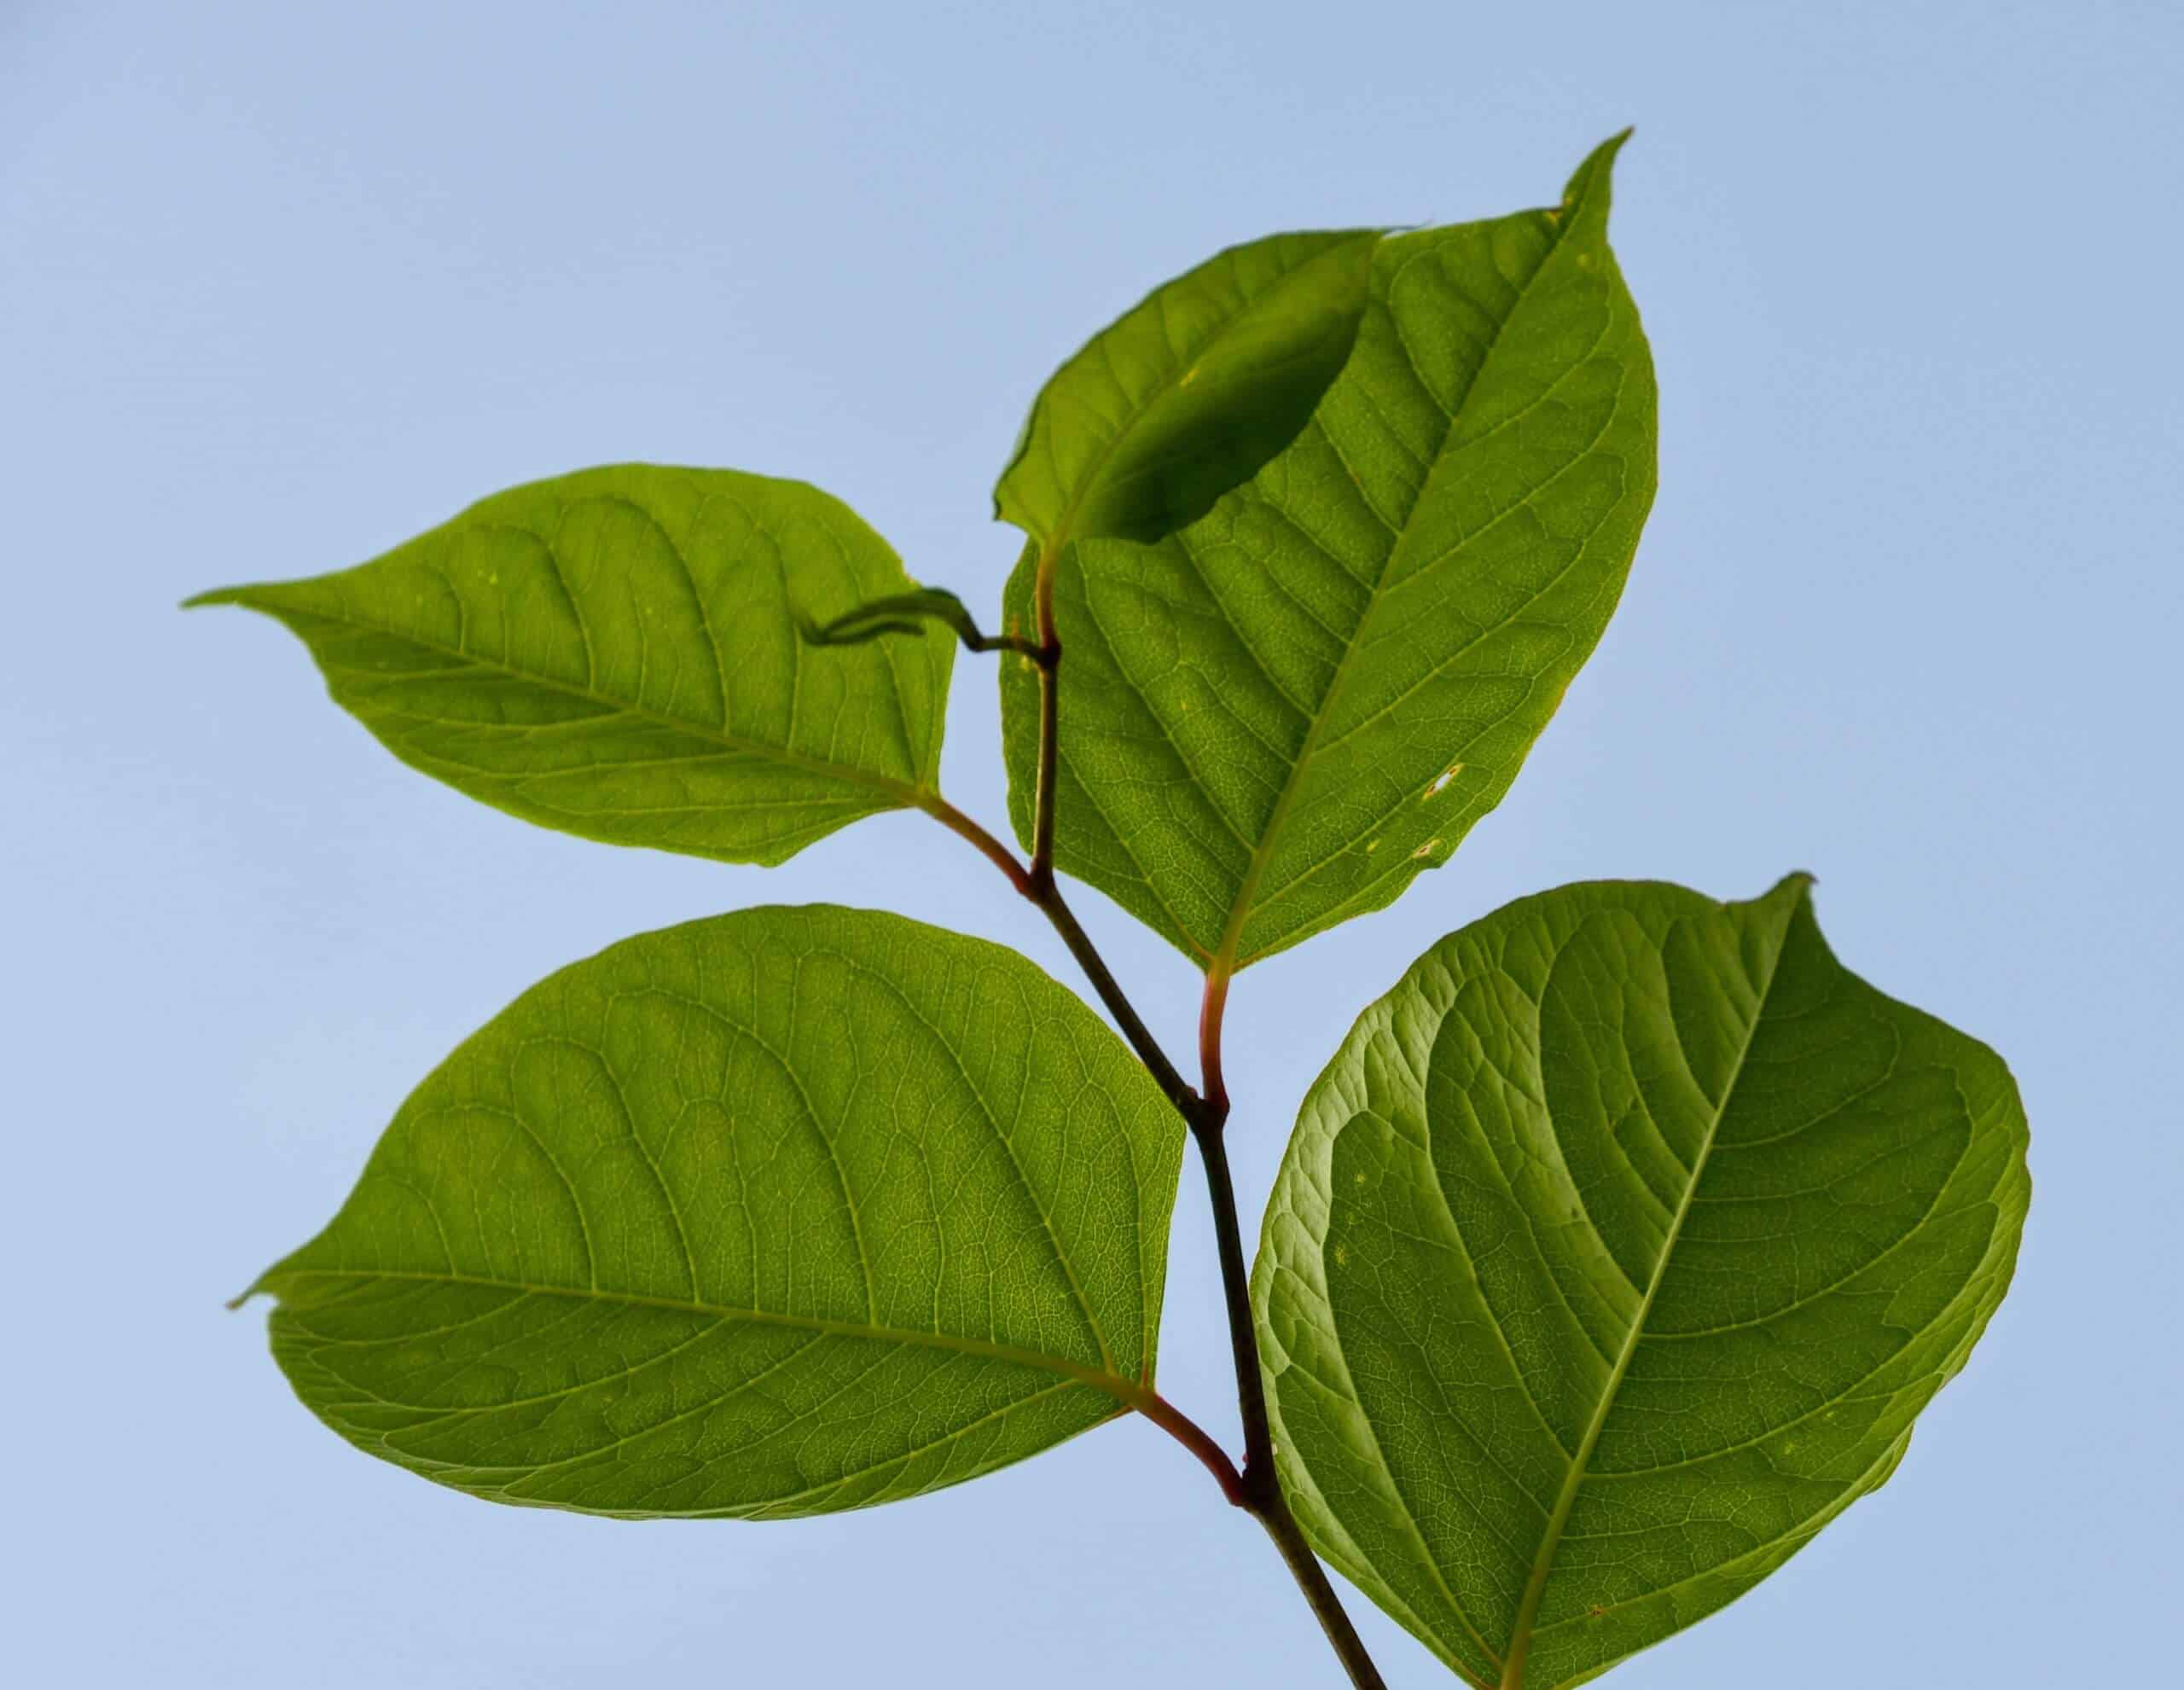 Japanese knotweed identification can cause confusion for those unaware of how many other plants it can be mistaken for